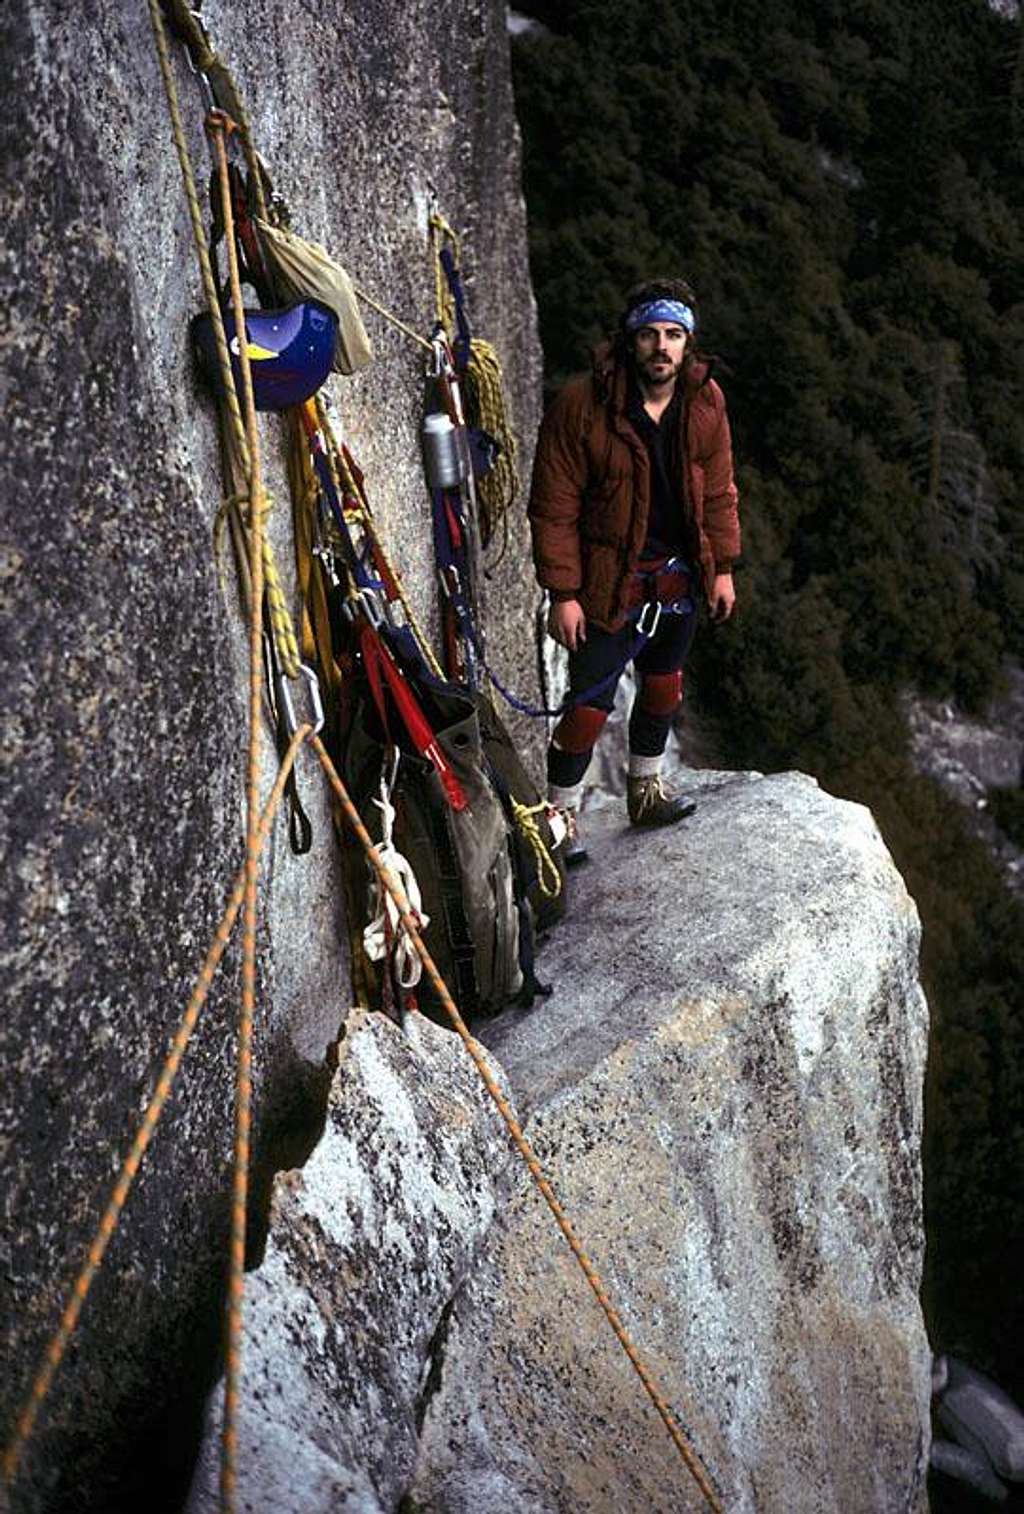 Bill Crouse on Anchorage Ledge